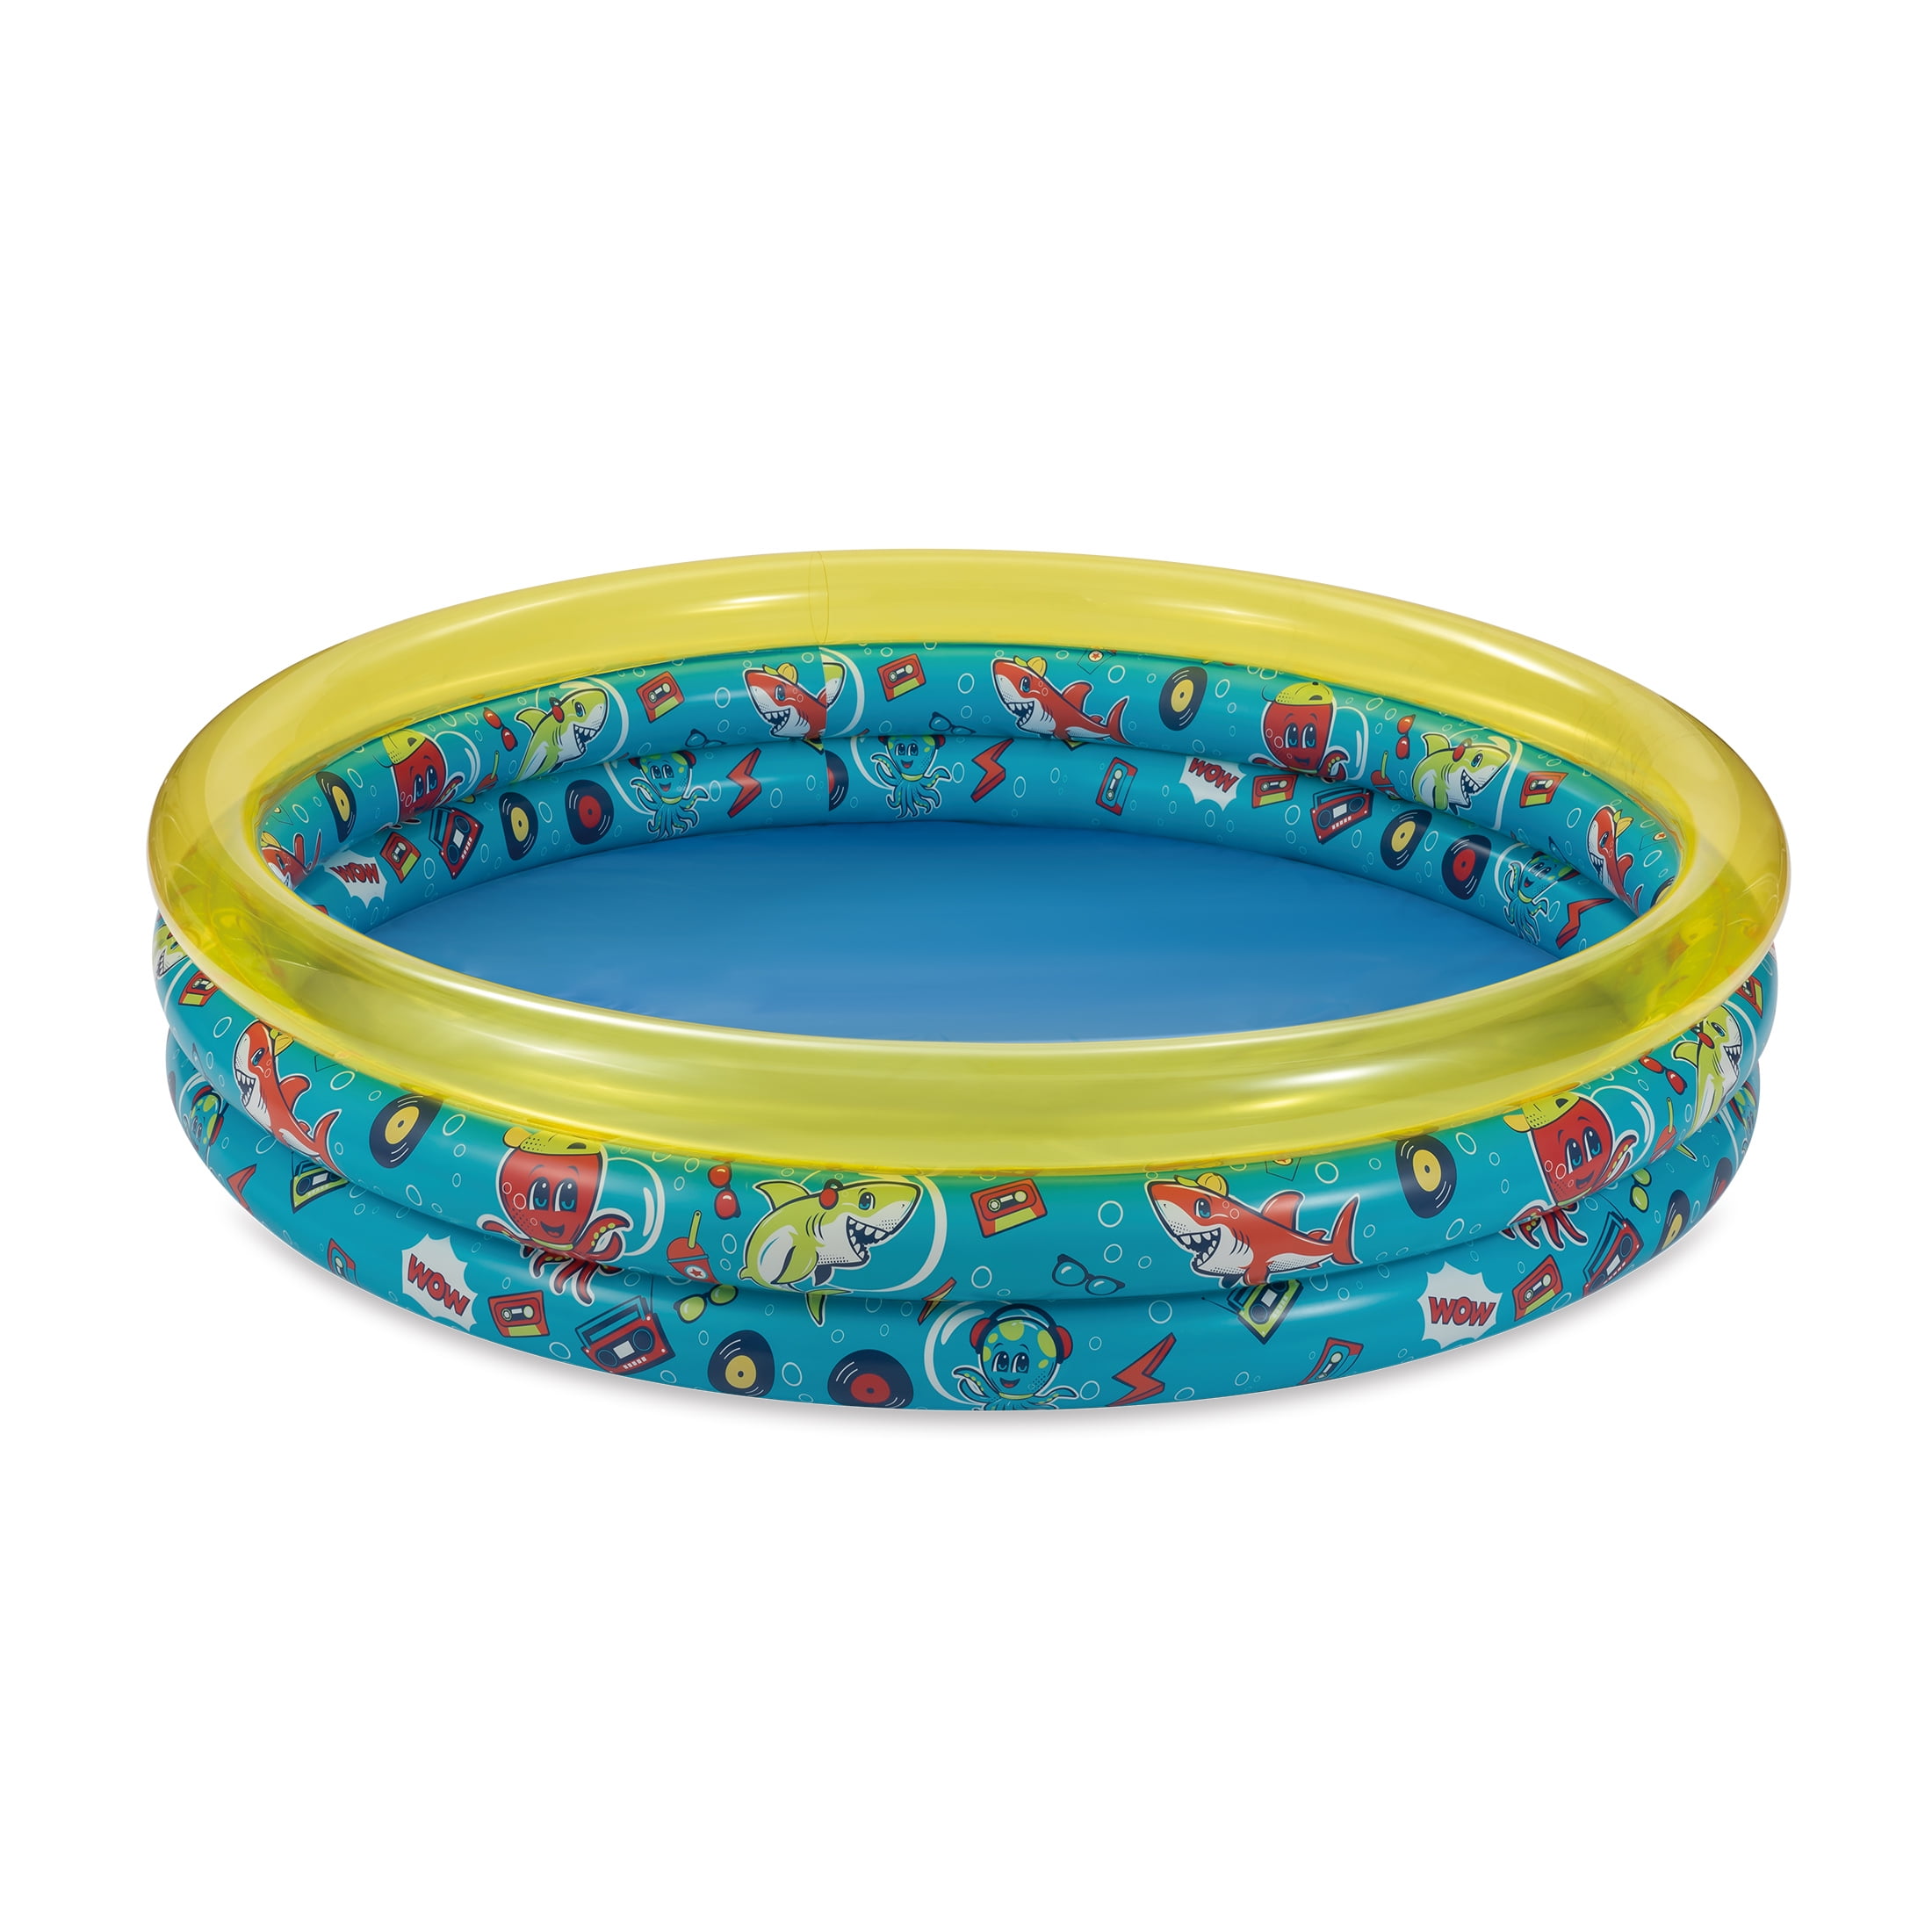 Round Inflatable 3-Ring Kiddie Splash Play Pool, Yellow, For Kids, Age 2 & up, Unisex $4.04 + Free S&H w/ Walmart+ or $35+